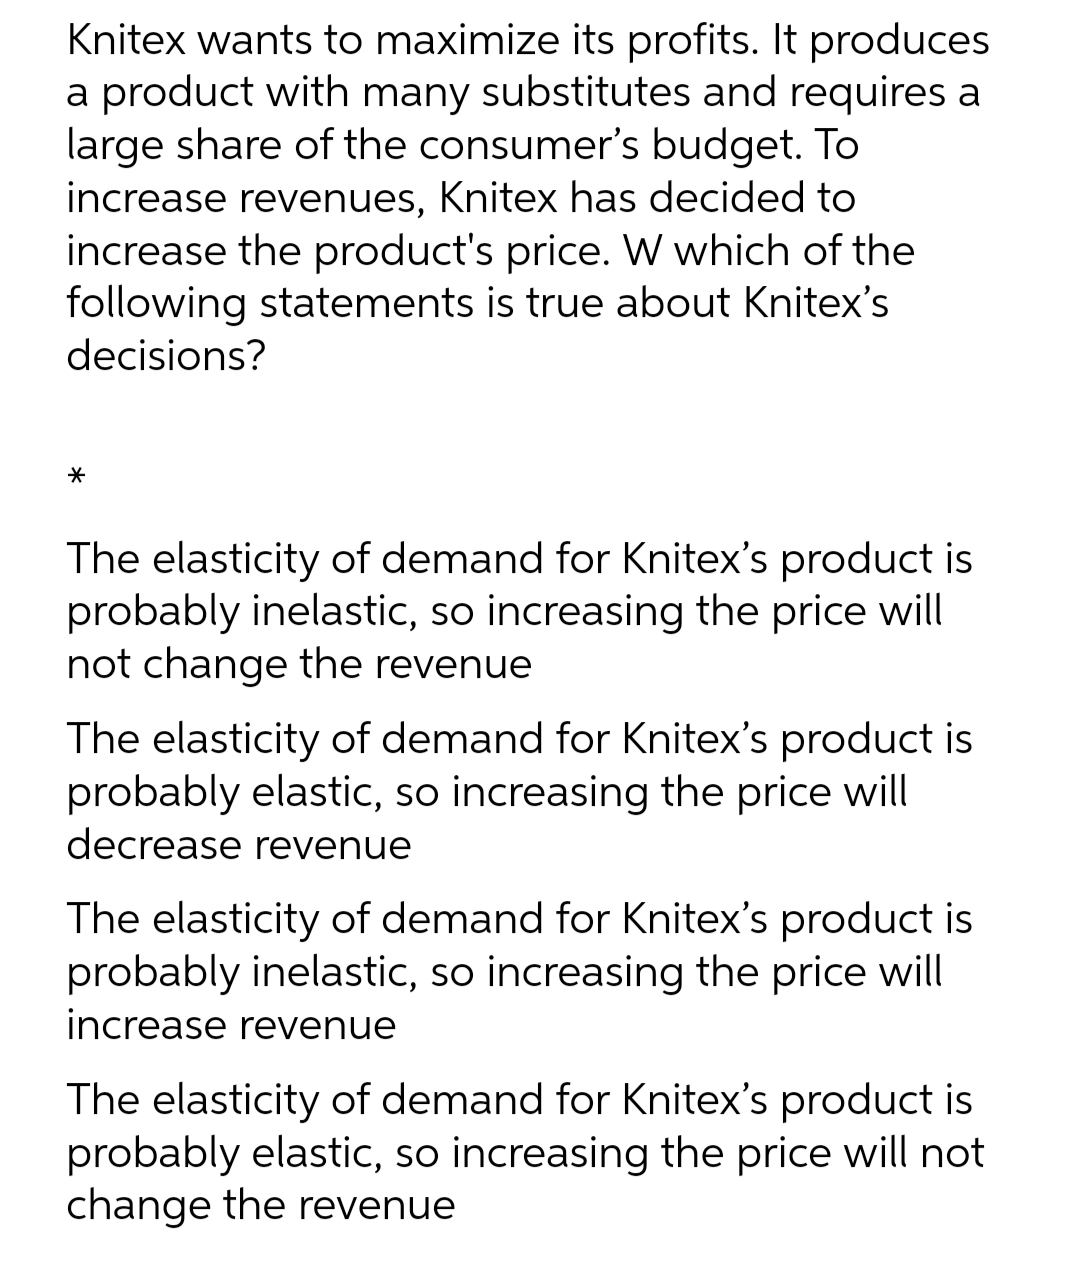 Knitex wants to maximize its profits. It produces
a product with many substitutes and requires a
large share of the consumer's budget. To
increase revenues, Knitex has decided to
increase the product's price. W which of the
following statements is true about Knitex's
decisions?
*
The elasticity of demand for Knitex's product is
probably inelastic, so increasing the price will
not change the revenue
The elasticity of demand for Knitex's product is
probably elastic, so increasing the price will
decrease revenue
The elasticity of demand for Knitex's product is
probably inelastic, so increasing the price will
increase revenue
The elasticity of demand for Knitex's product is
probably elastic, so increasing the price will not
change the revenue